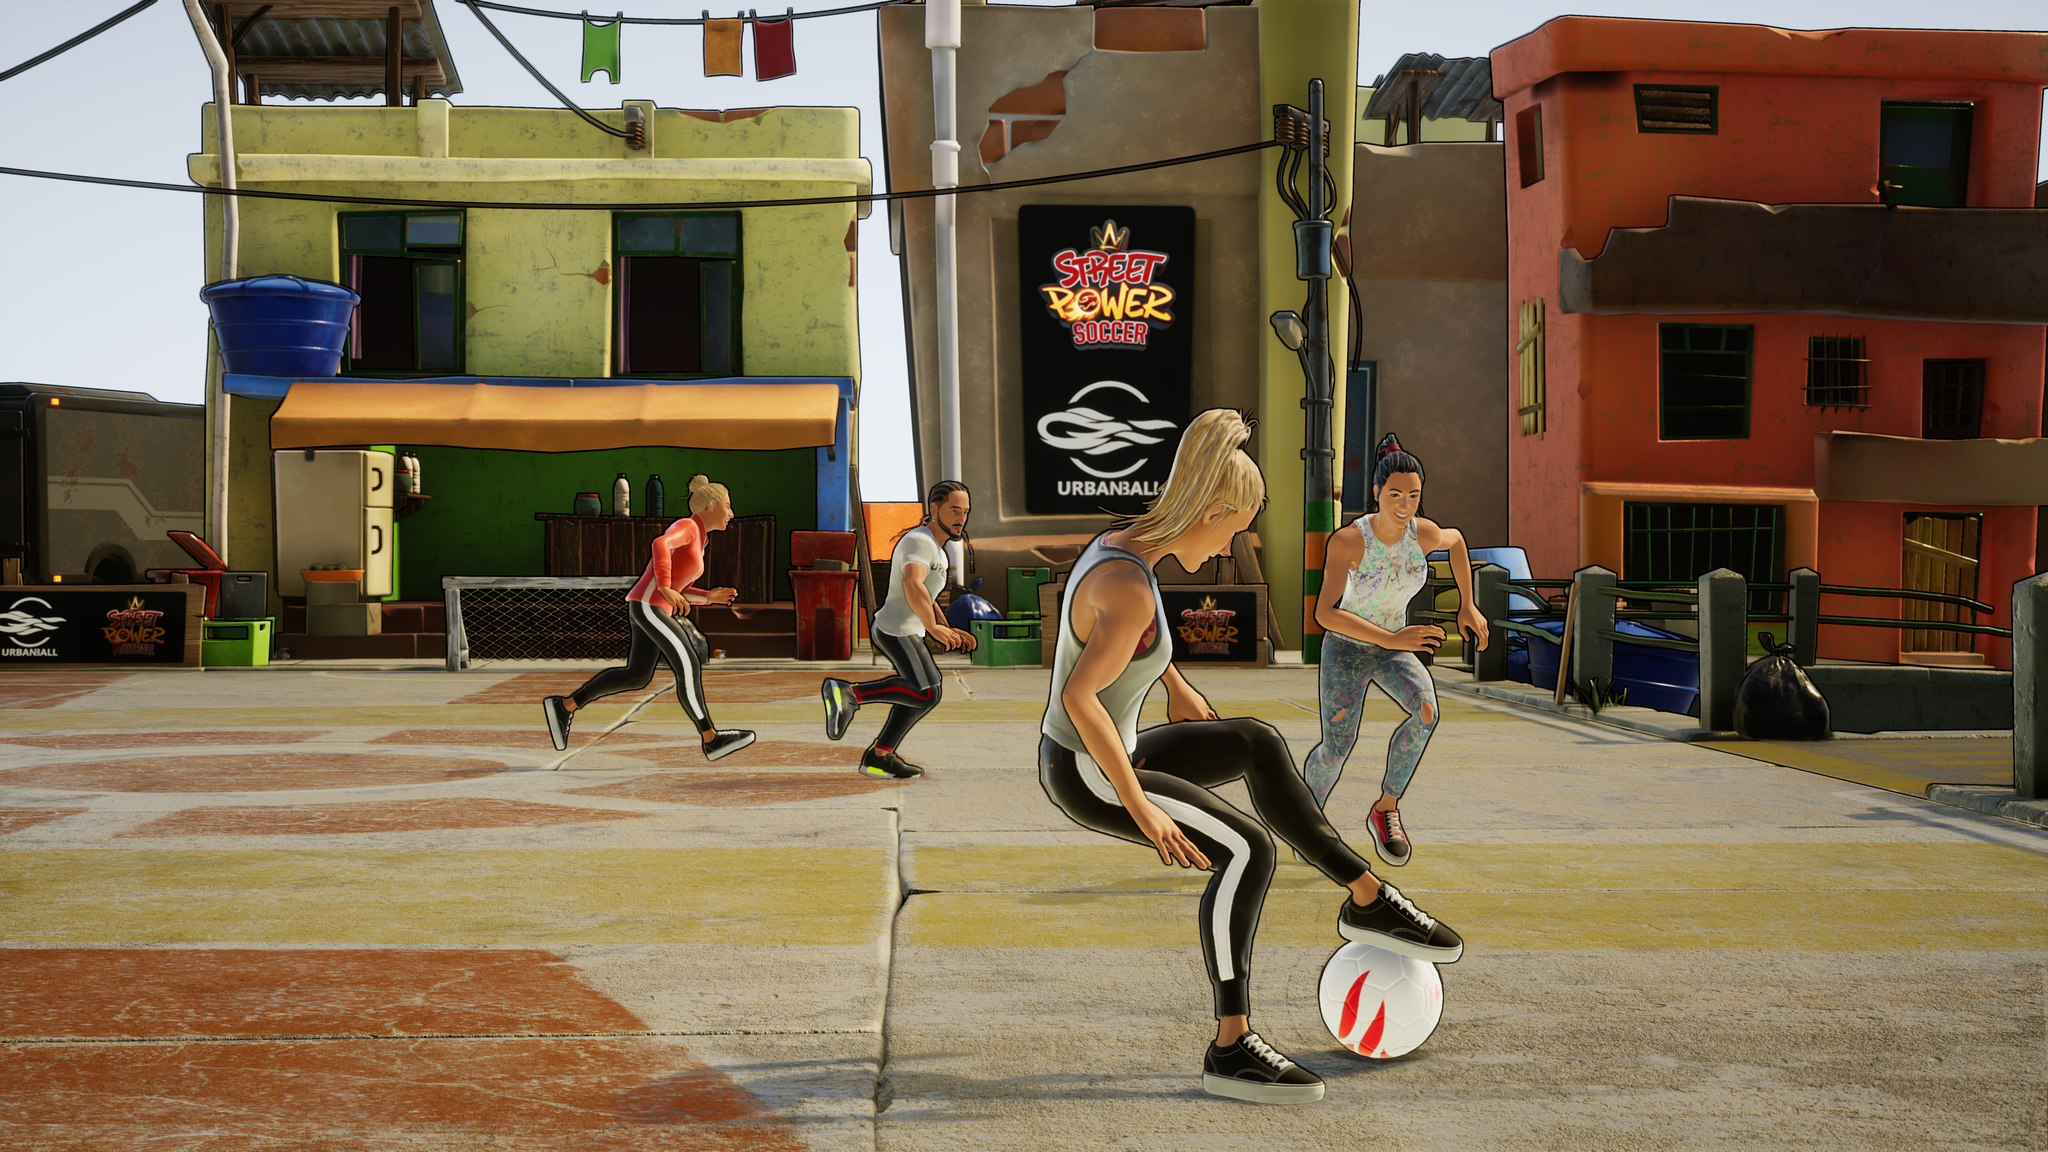 Street Power Football is Your New FIFA Street, Coming Summer 2020 to PS4, Xbox One, PC, Switch